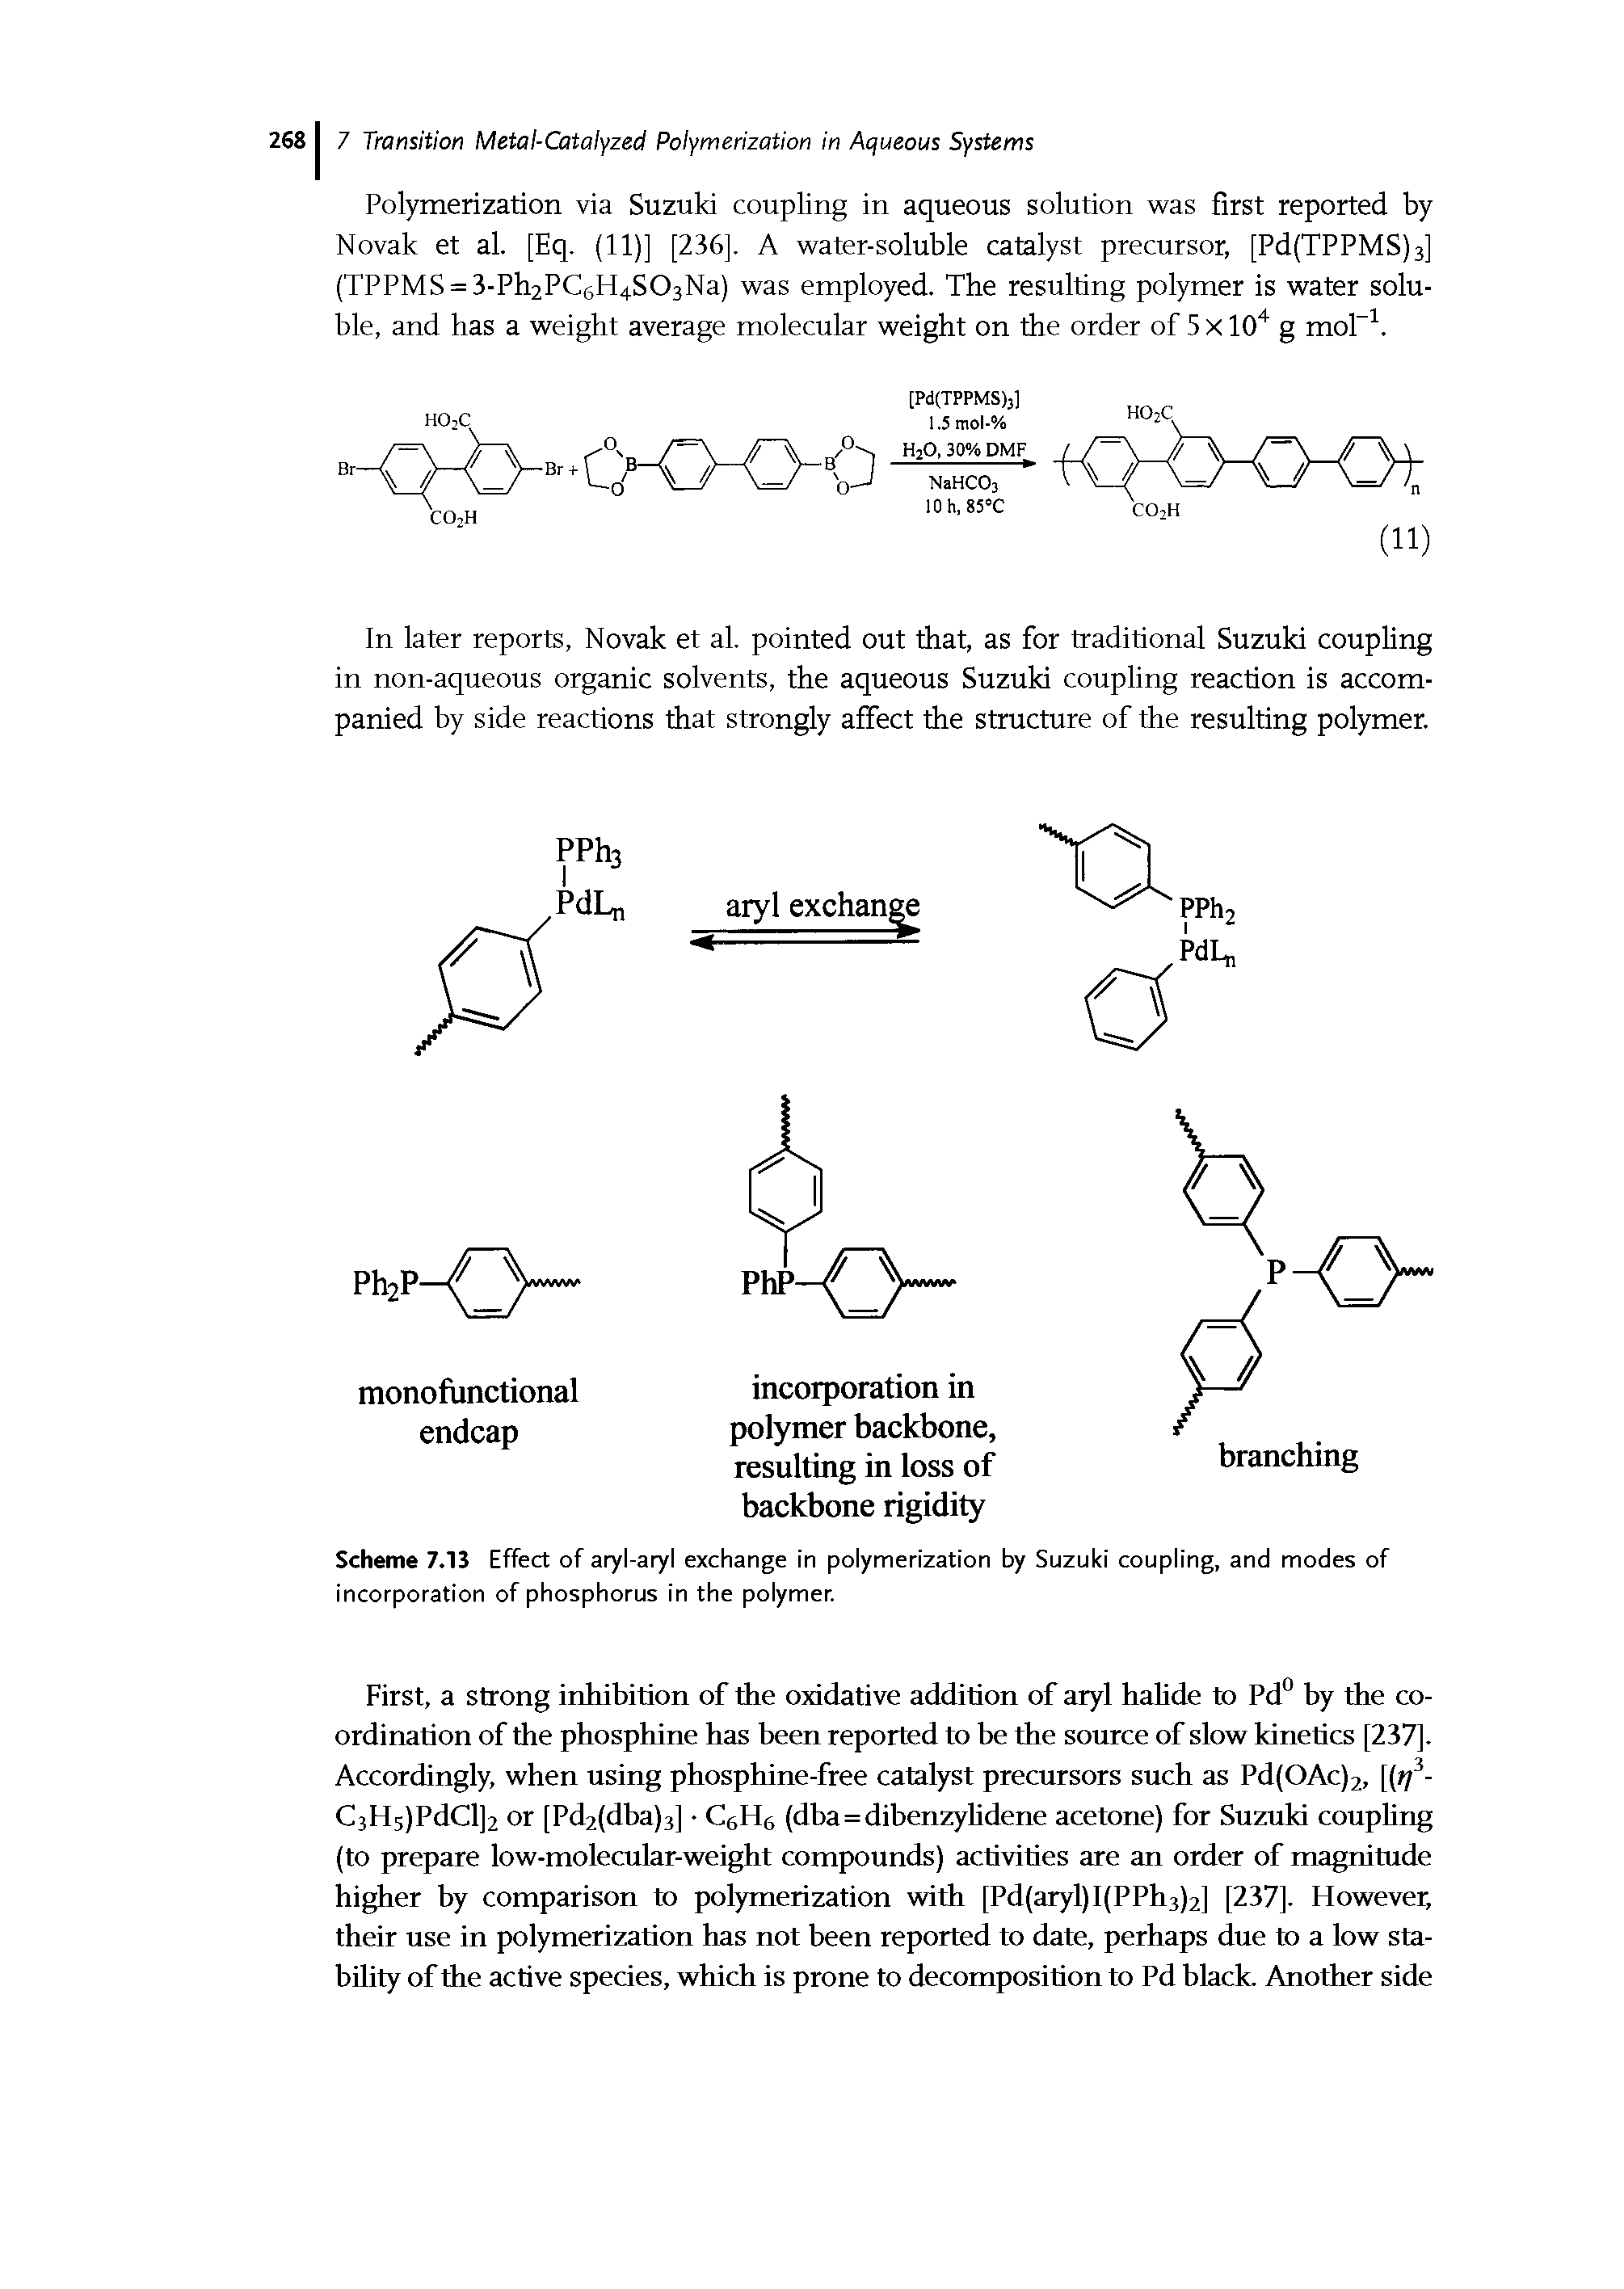 Scheme 7.13 Effect of aryl-aryl exchange in polymerization by Suzuki coupling, and modes of incorporation of phosphorus in the polymer.